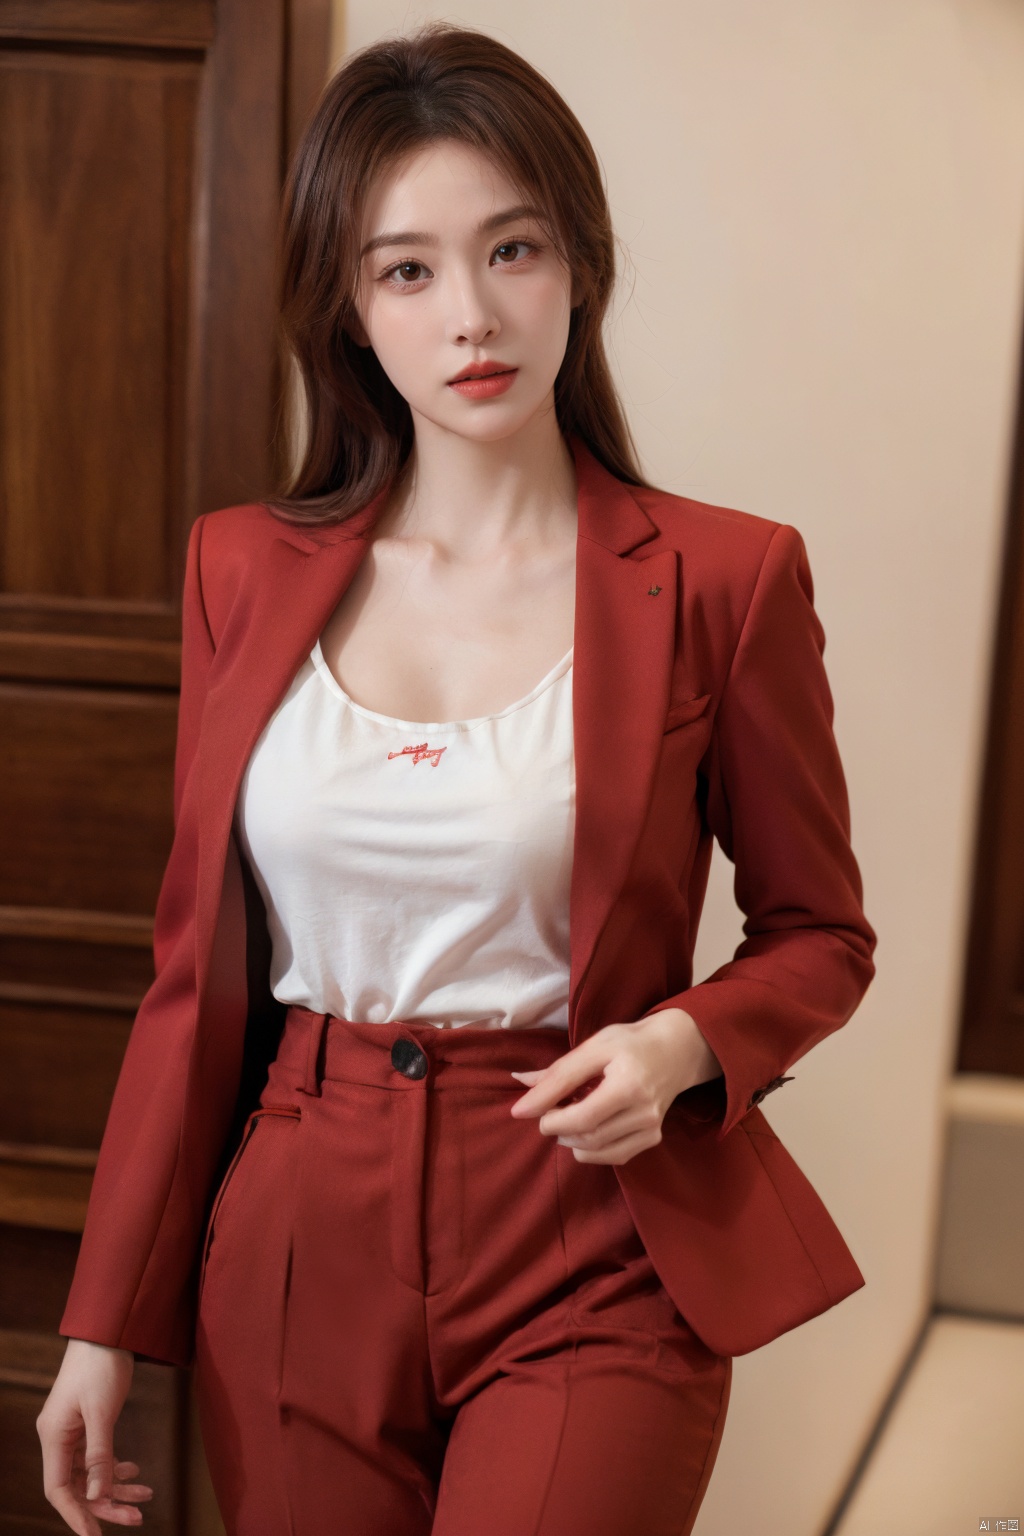  Xlongni,1Girl, suit, (photo reality: 1.3) , Edge lighting, (high detail skin: 1.2) , 8K Ultra HD, high quality, high resolution, (photo reality: 1.3) , (wear a red suit jacket, white shirt inside:1.29), large breasts, high-grade feeling, texture pull full, 1 girl,Xlongni,(big_breasts:1.39)